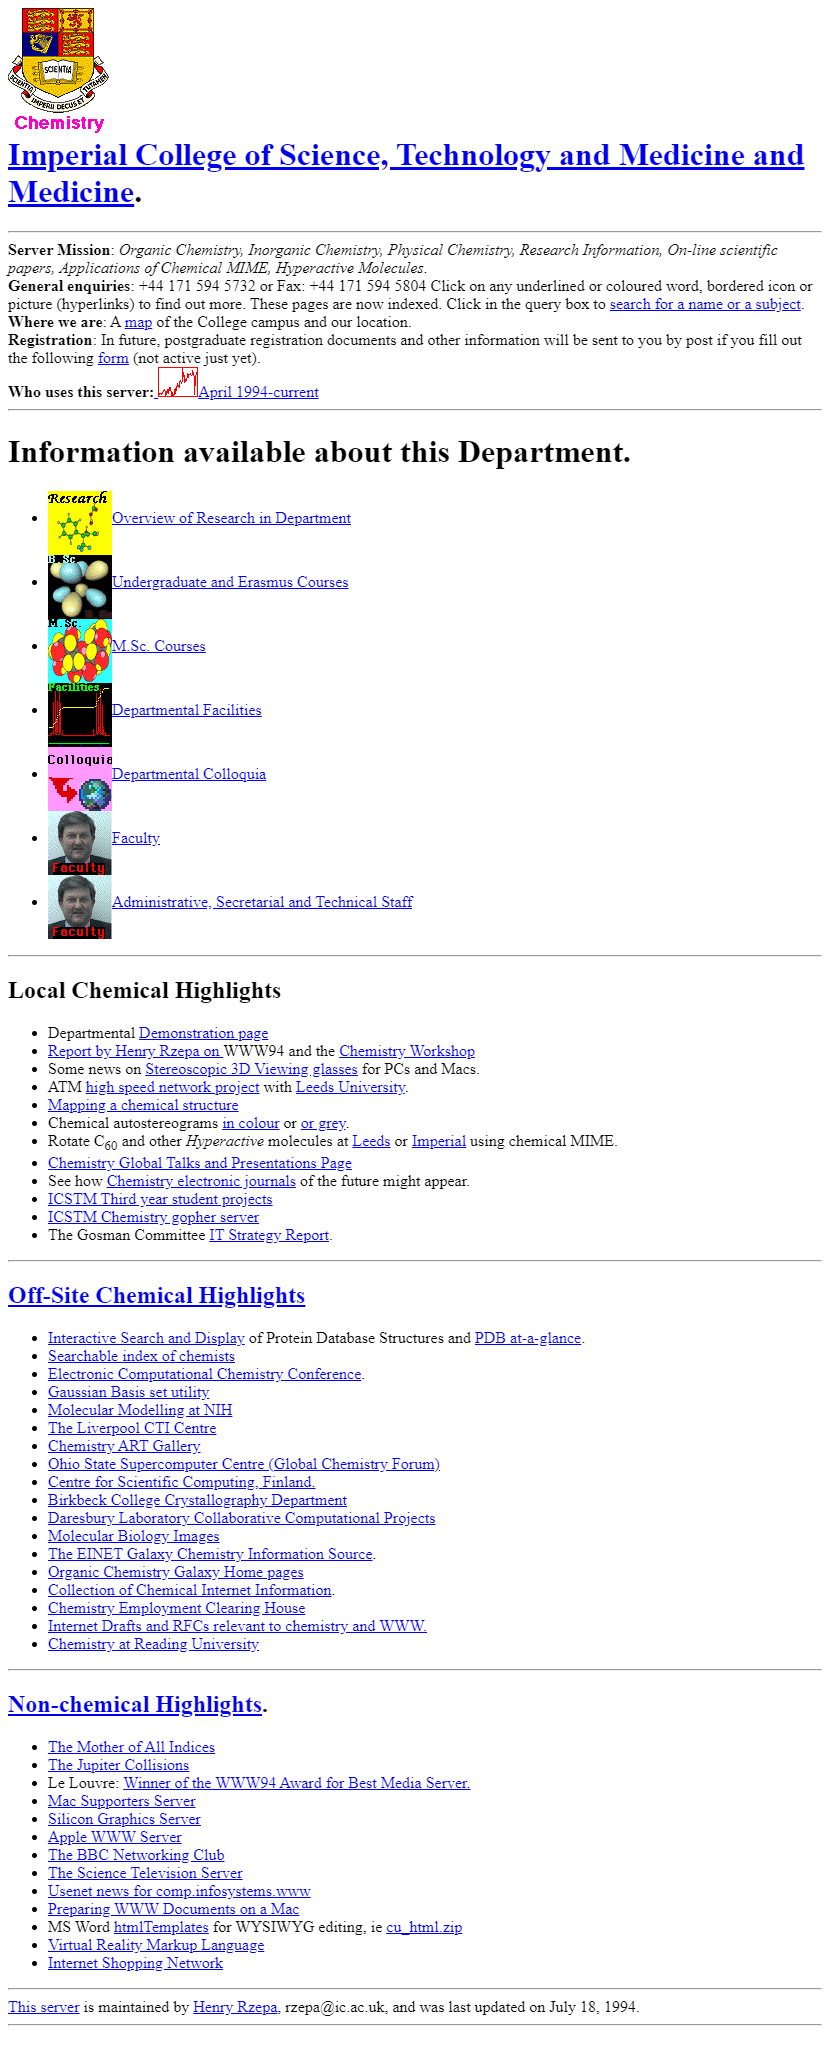 Department of Chemistry, Imperial College website in 1994